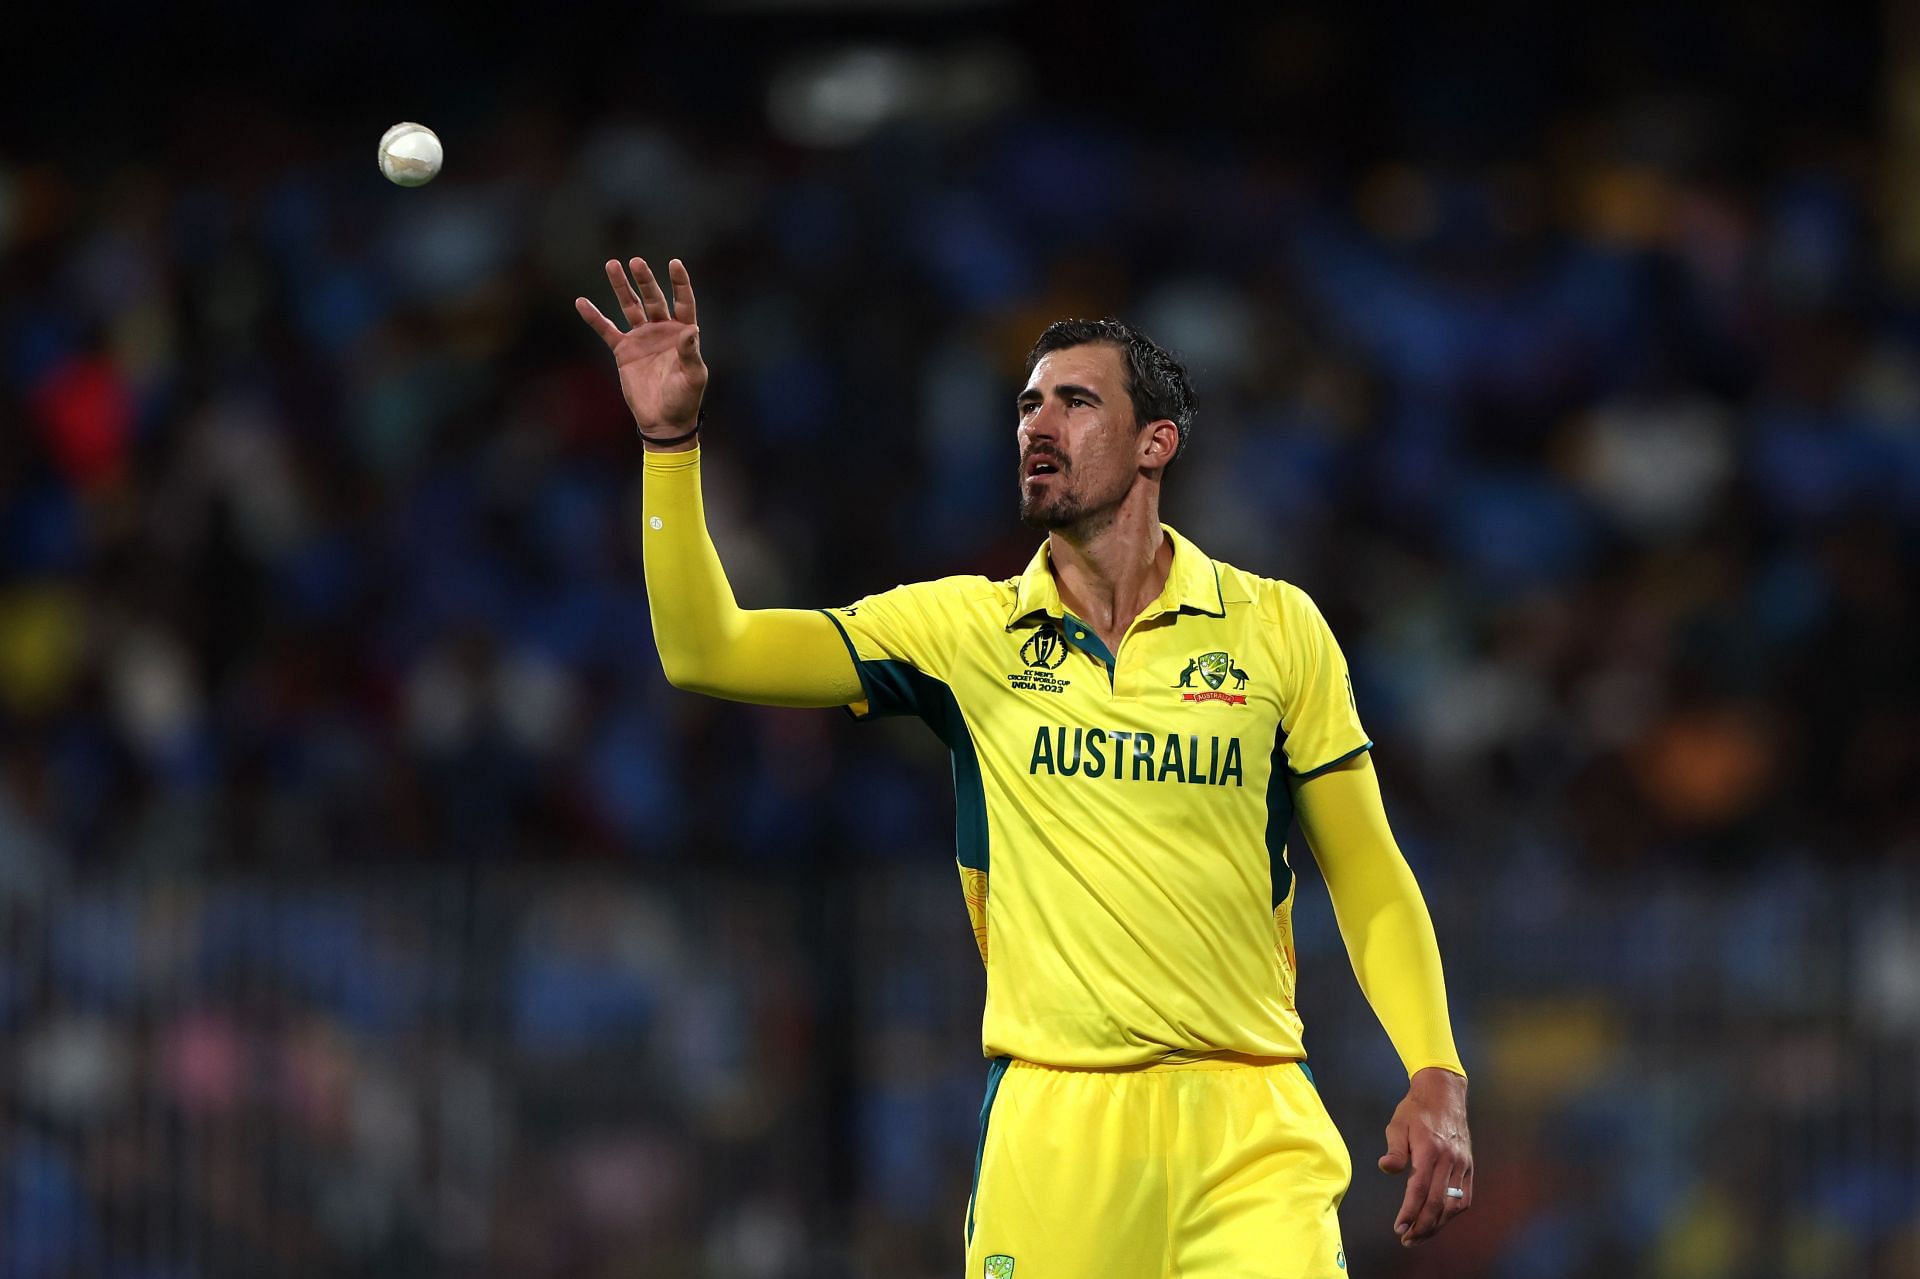 Mitchell Starc is the fastest pacer to complete 50 ODI wickets [Getty Images]